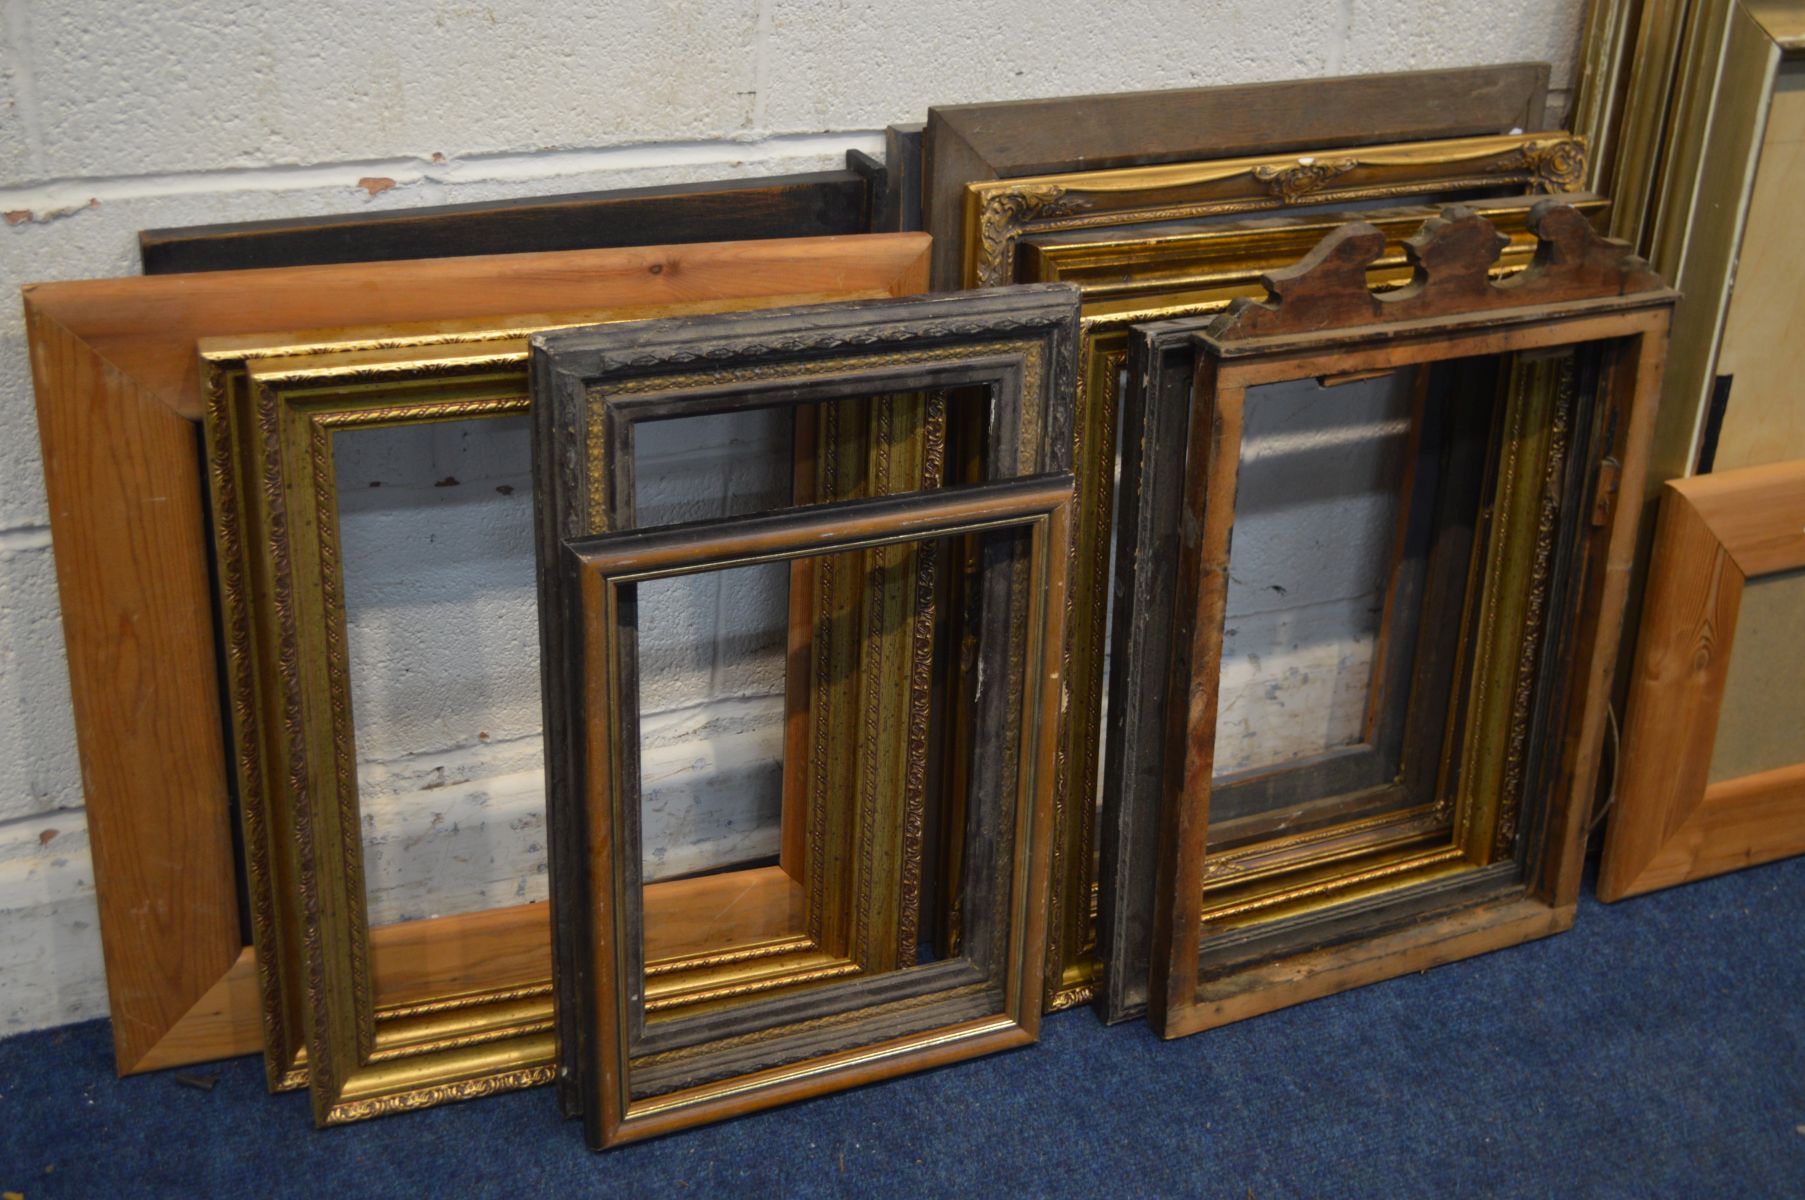 A QUANTITY OF PICTURE FRAMES OF VARIOUS AGES AND SIZES, together with two wall mirror and a modern - Image 2 of 4